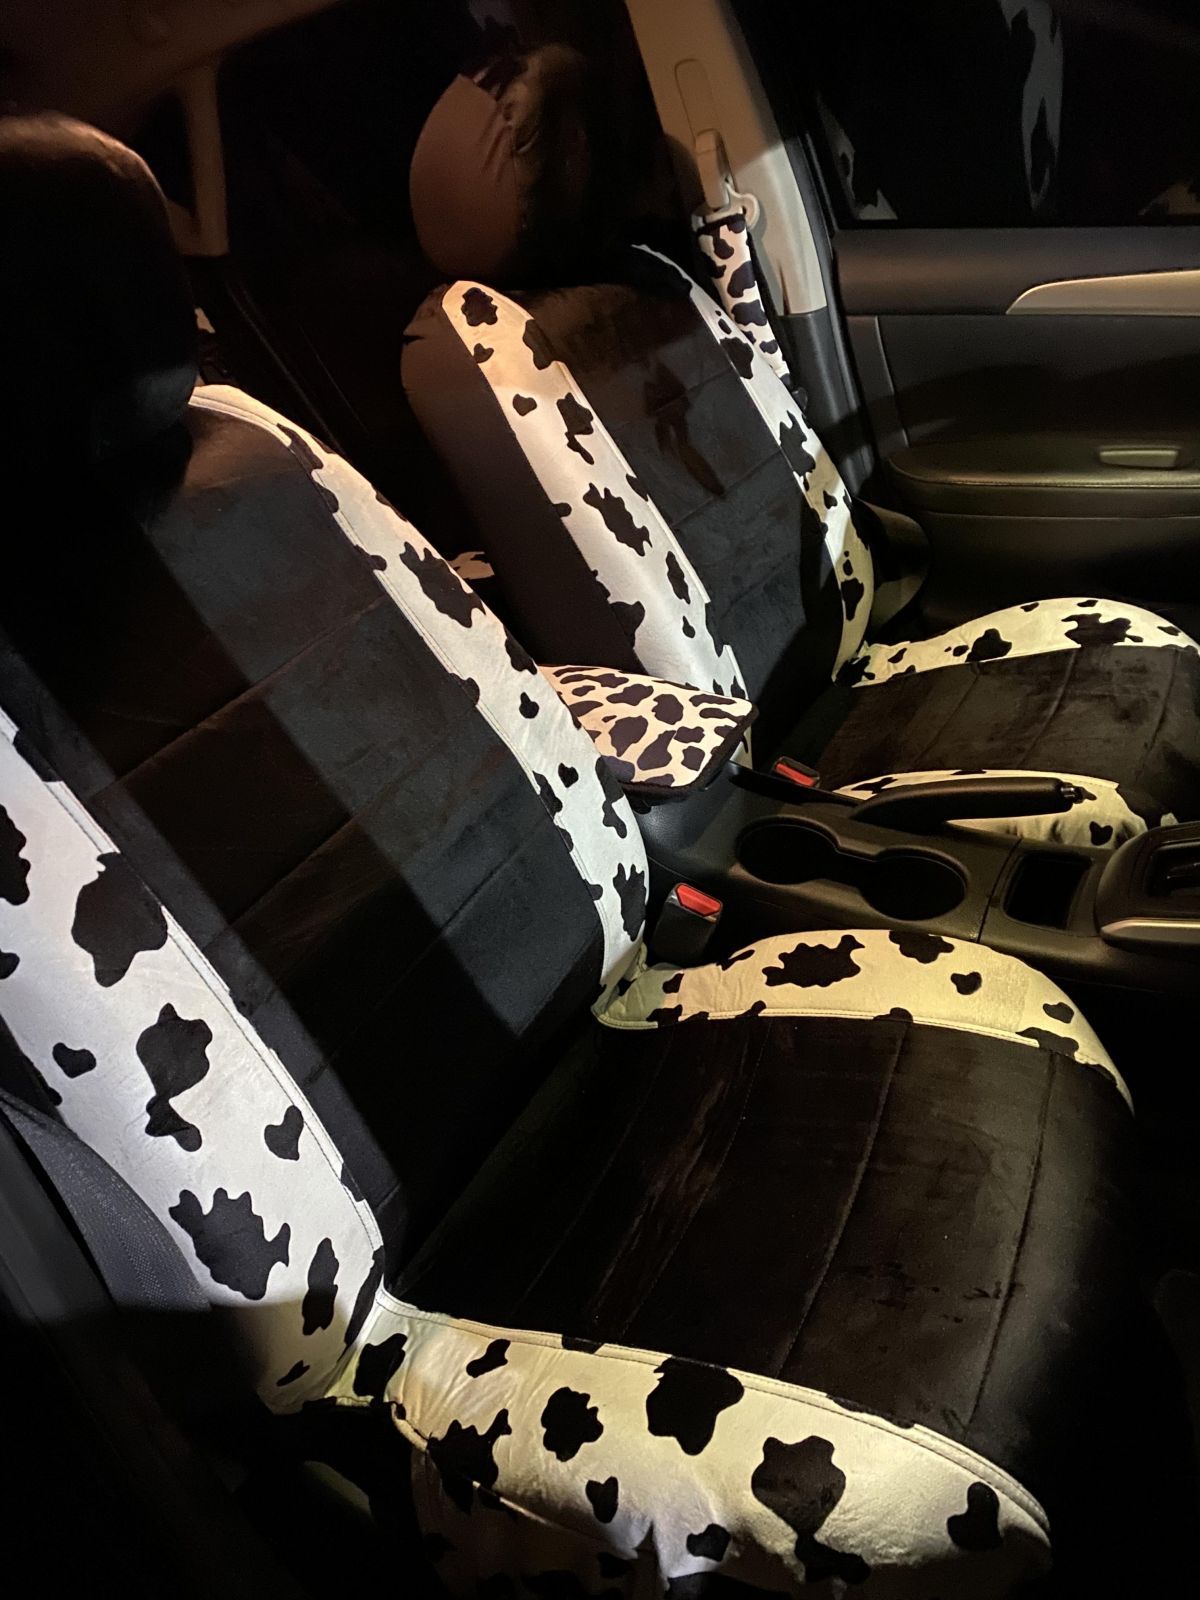 Lisha 2-Piece Printed Car Seat Headrest Cover for C-owboys for C-owboys Black Breathable Flexible Headrest Covers Fit for Most Car Models 